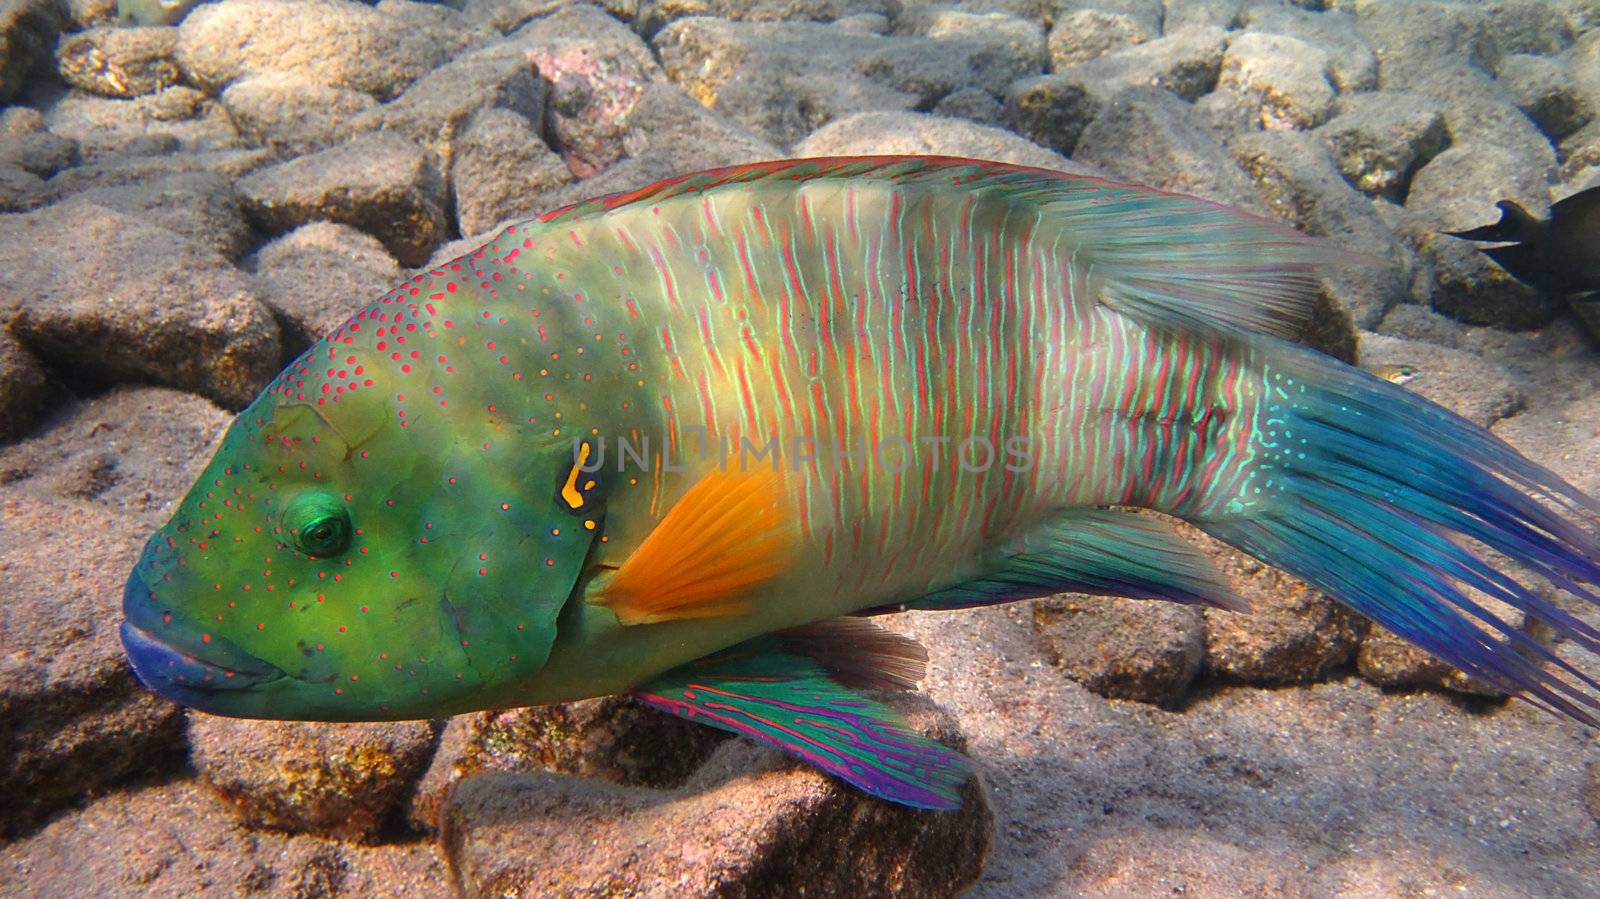 Broomtail Wrasse fish living on the coral reef in the Red Sea